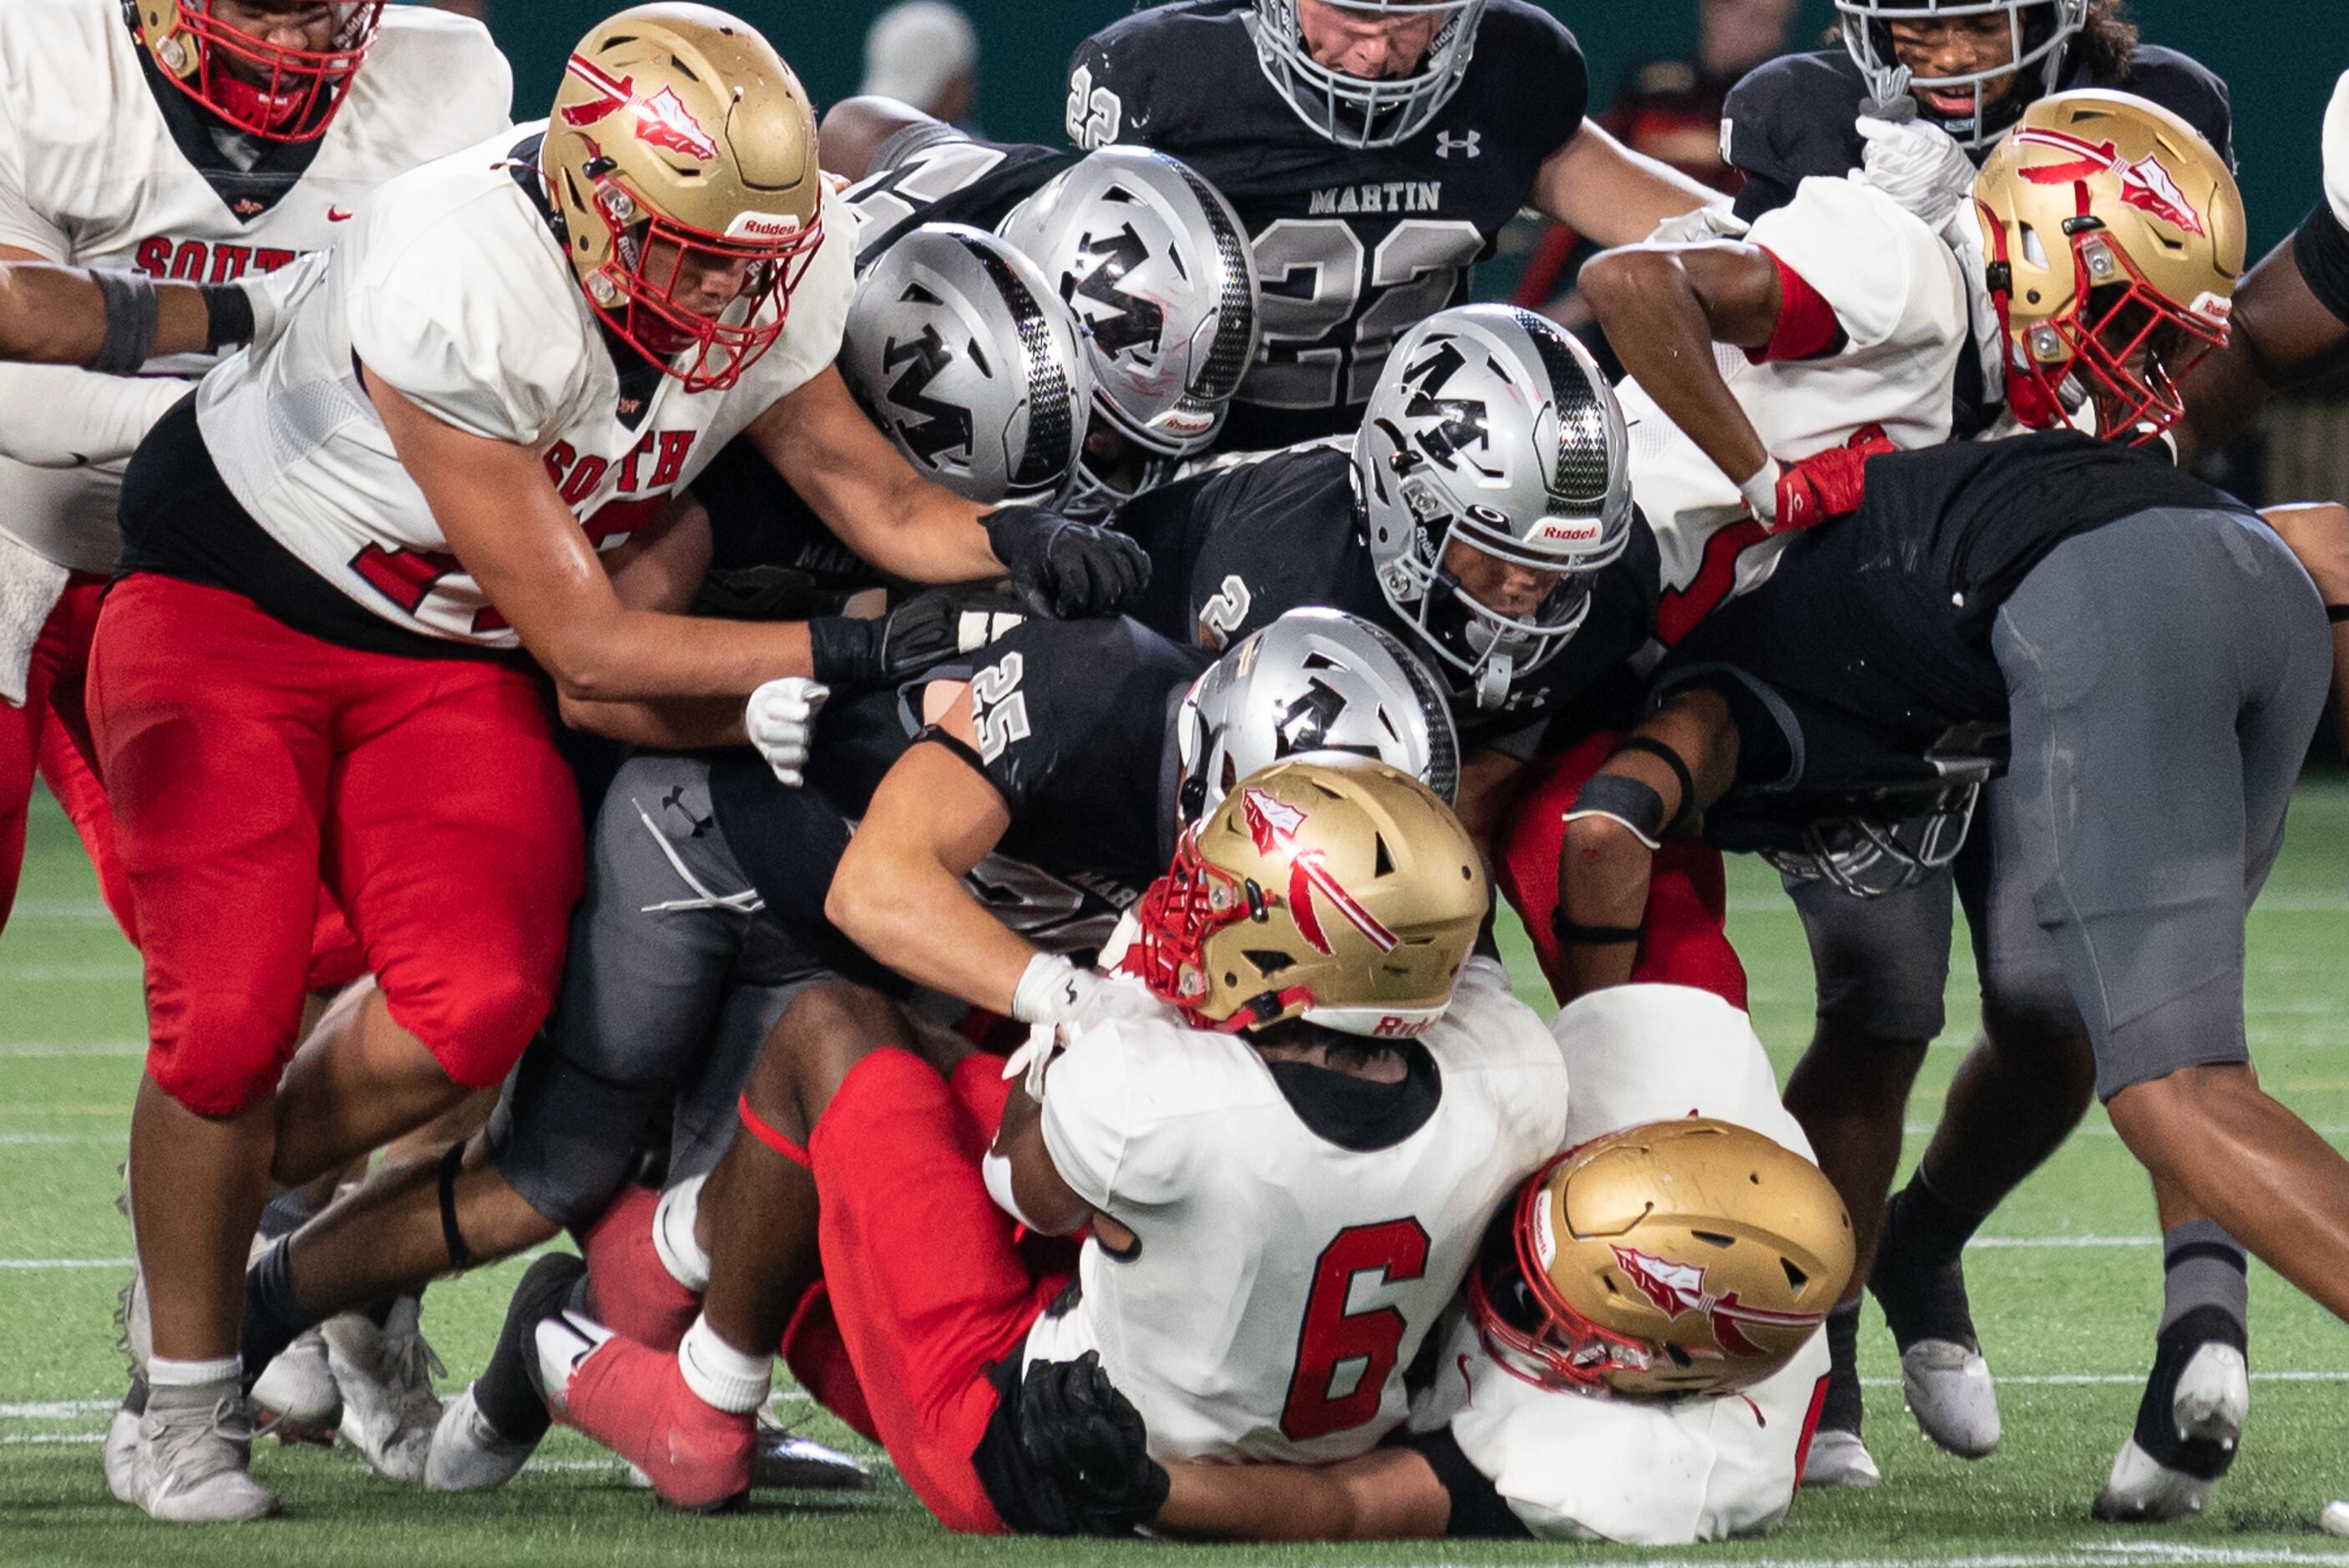 South Grand Prairie senior running back AJ Newberry (6) is tackled by a gang of Arlington...